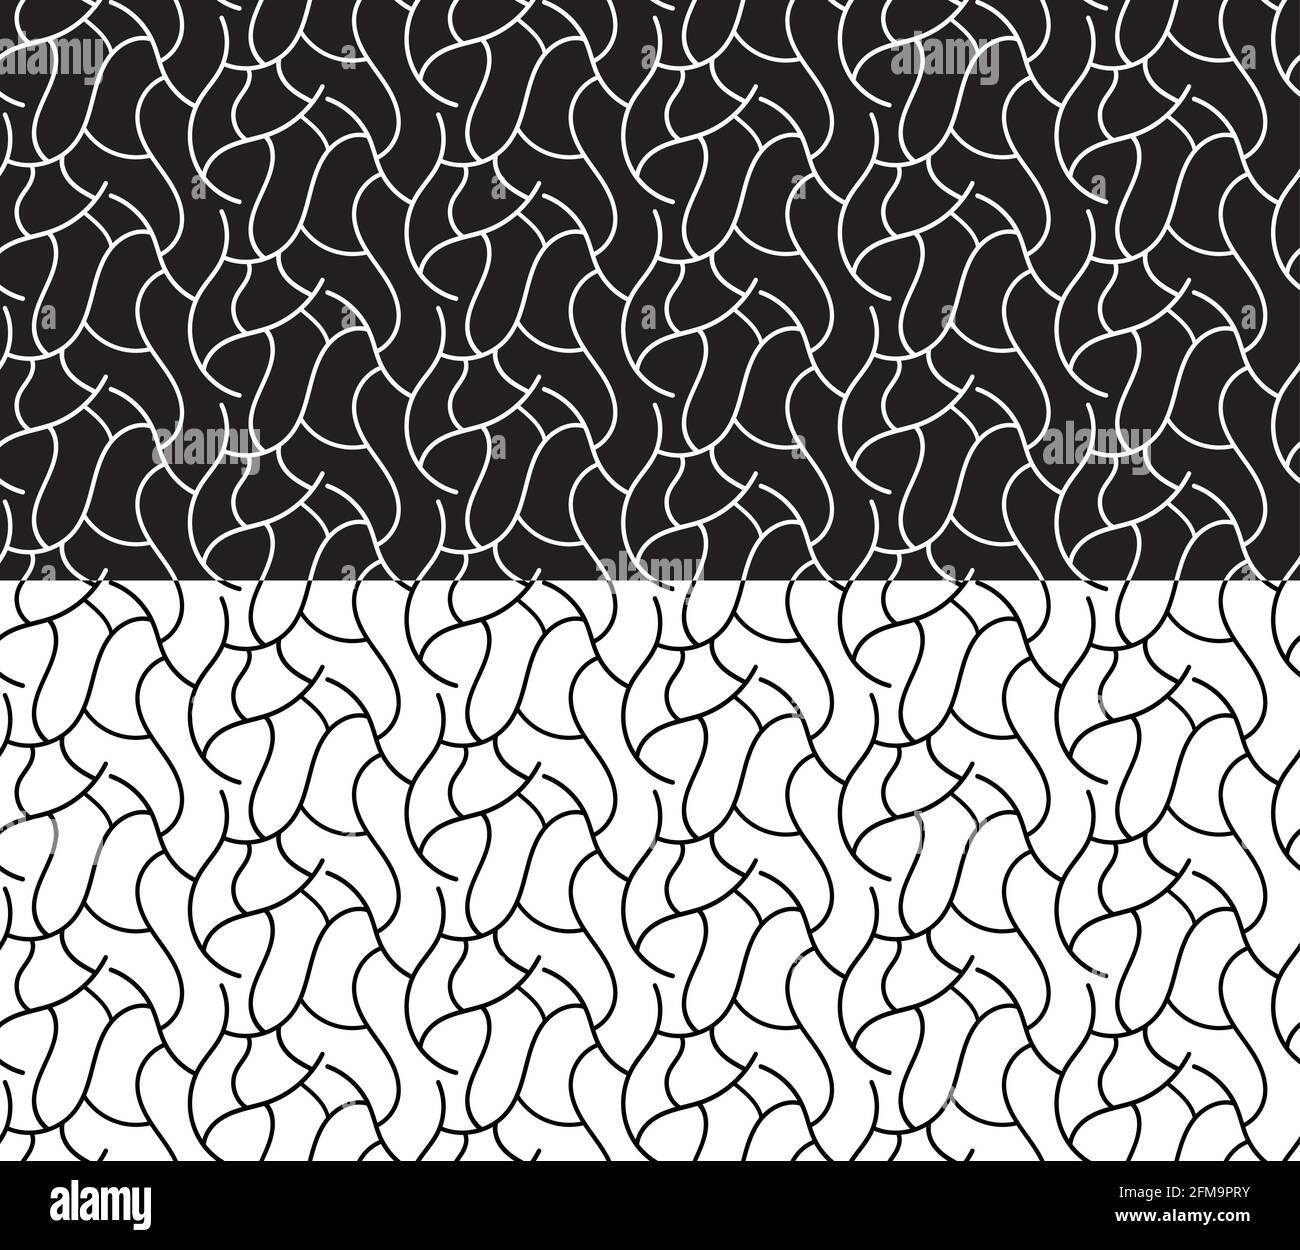 Black white curved lines as stylized branches. Seamless abstract pattern. Vector illustration Stock Vector